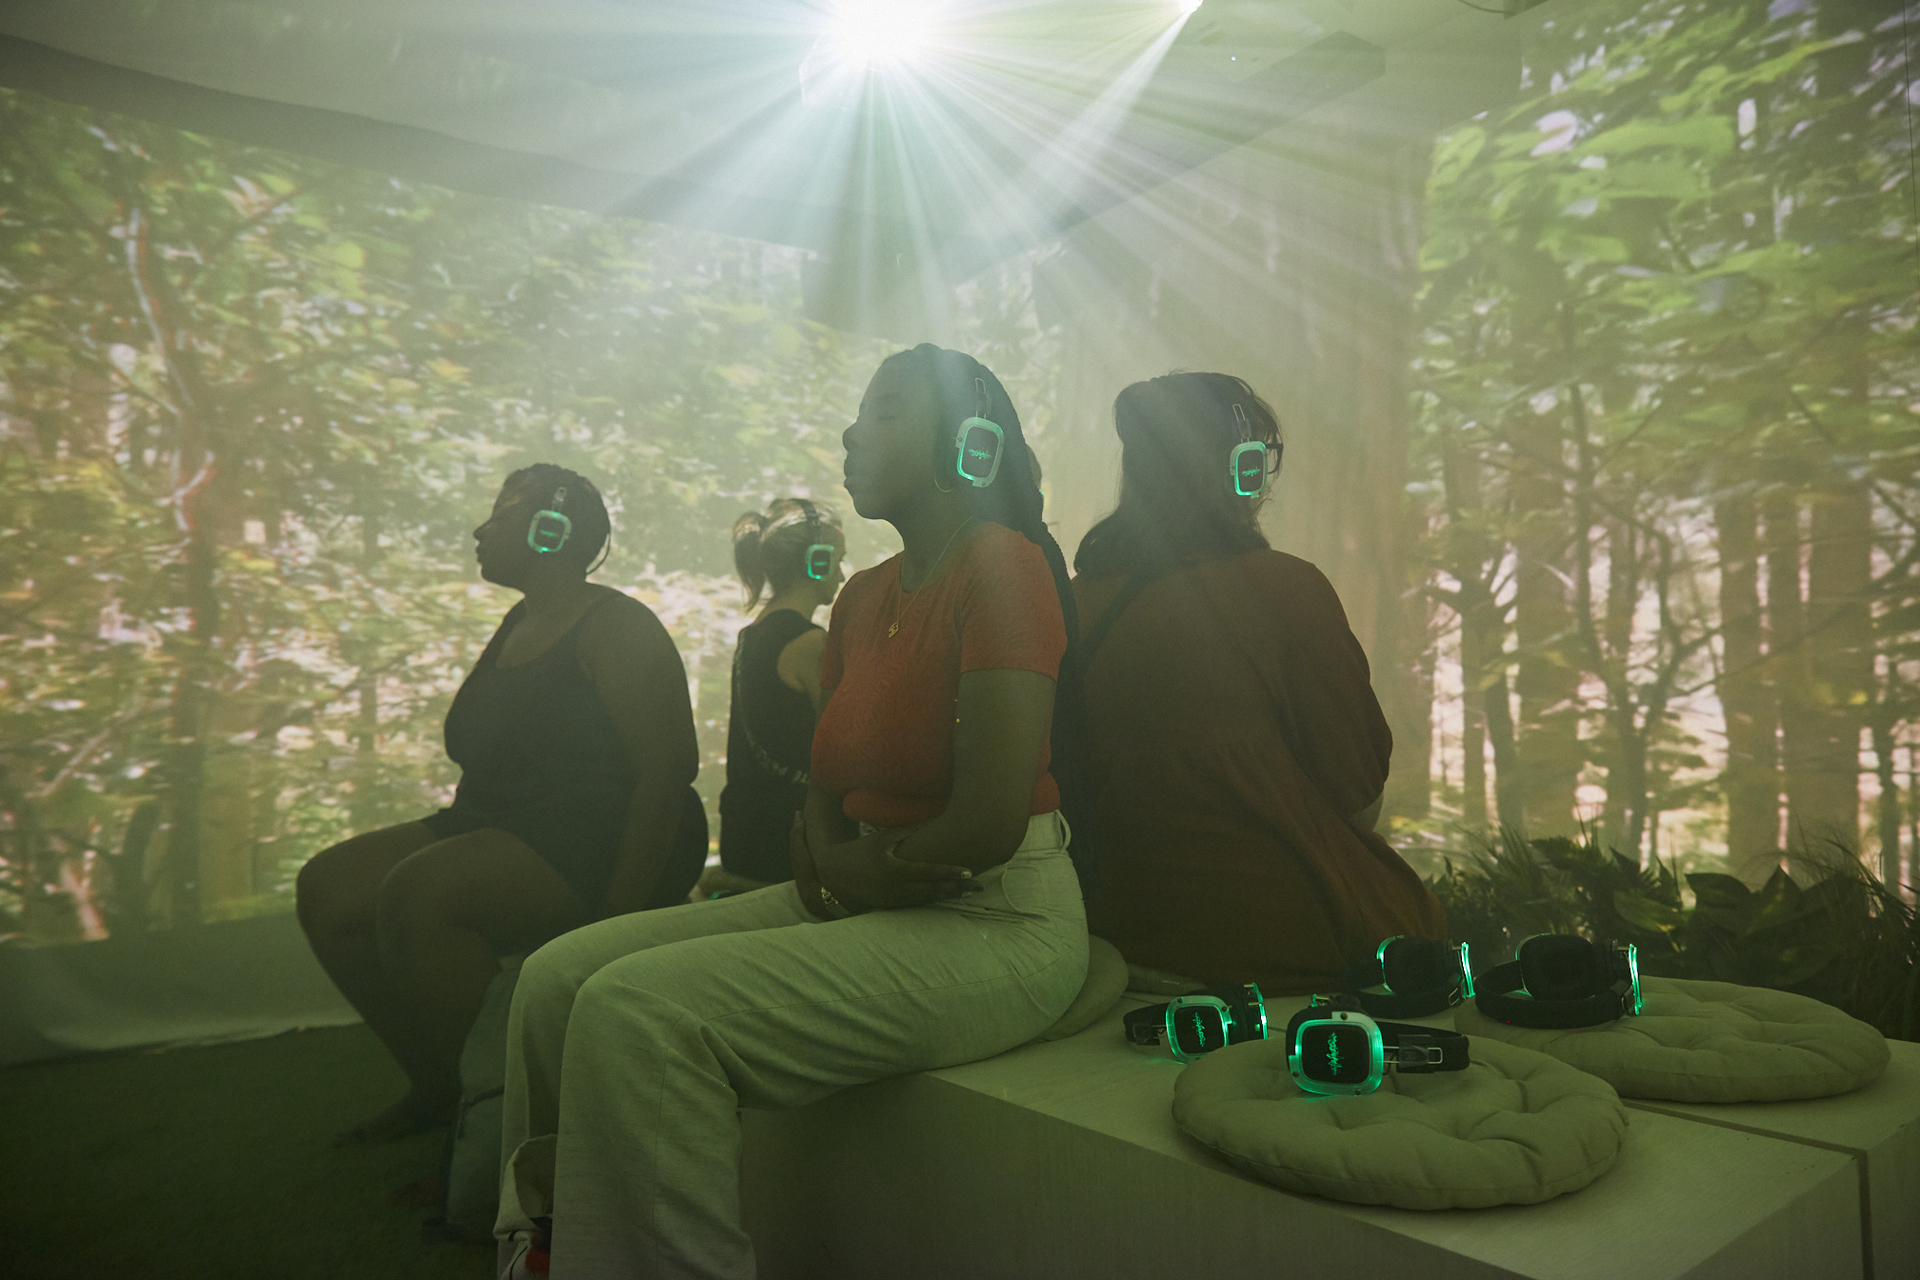 themed popup with people sitting in what looks like a forest with headphones on